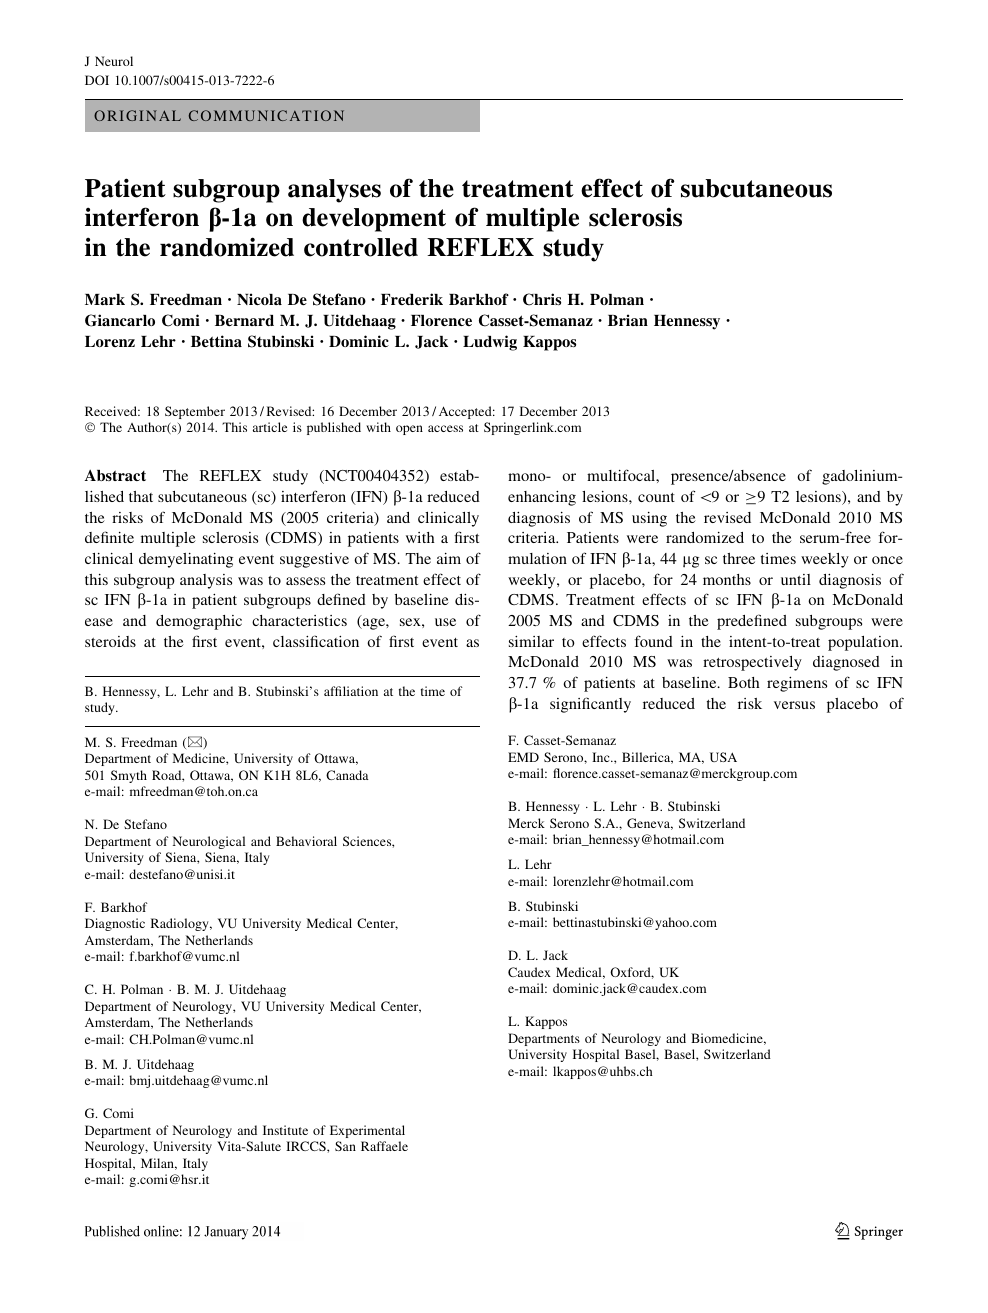 Patient Subgroup Analyses Of The Treatment Effect Of Subcutaneous Interferon B 1a On Development Of Multiple Sclerosis In The Randomized Controlled Reflex Study Topic Of Research Paper In Clinical Medicine Download Scholarly